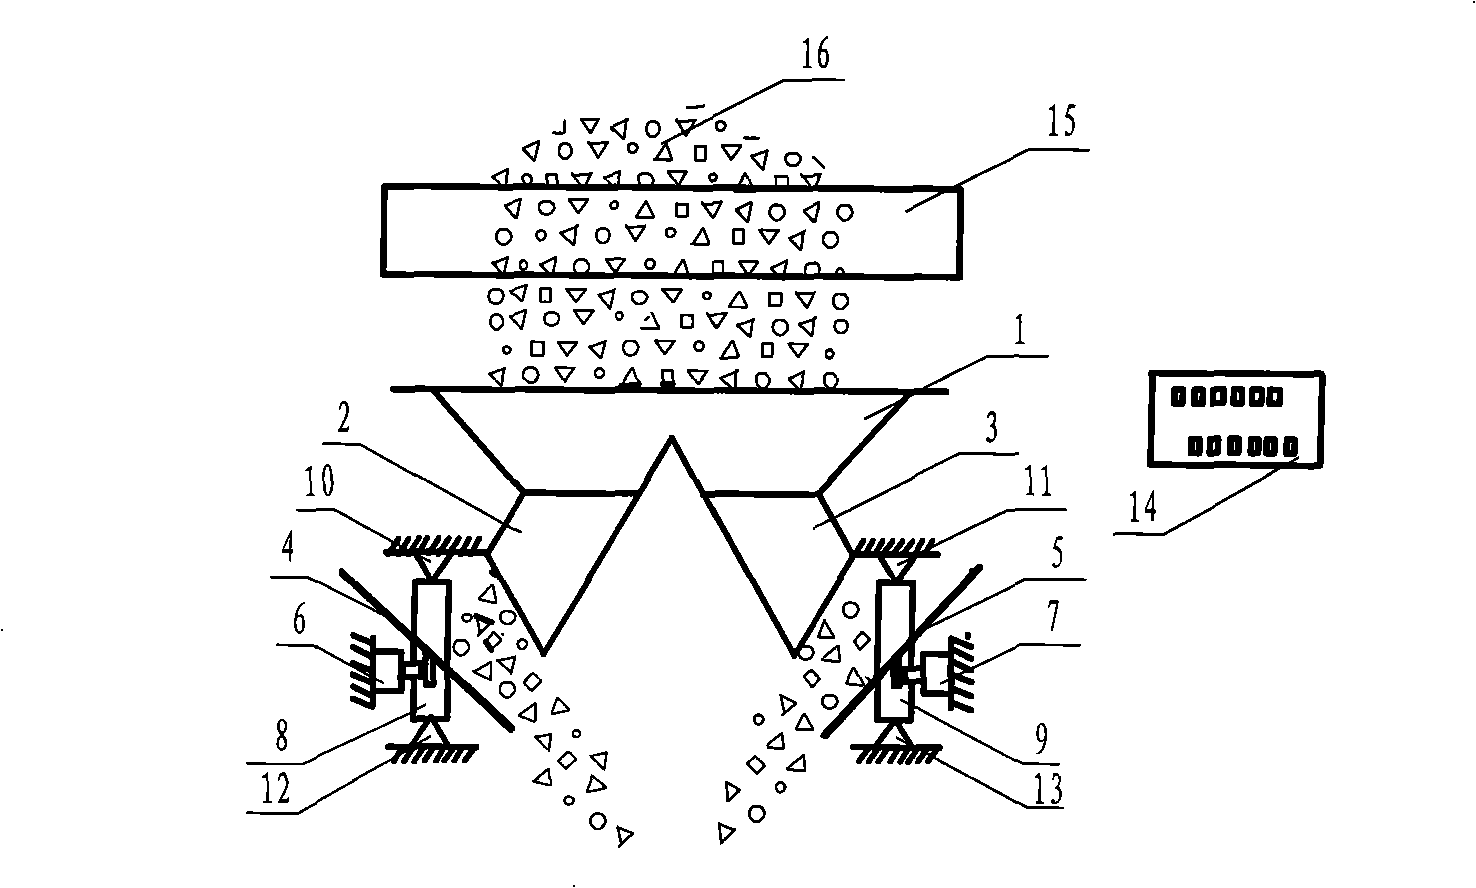 Continuous dynamic intelligent metering mechanism